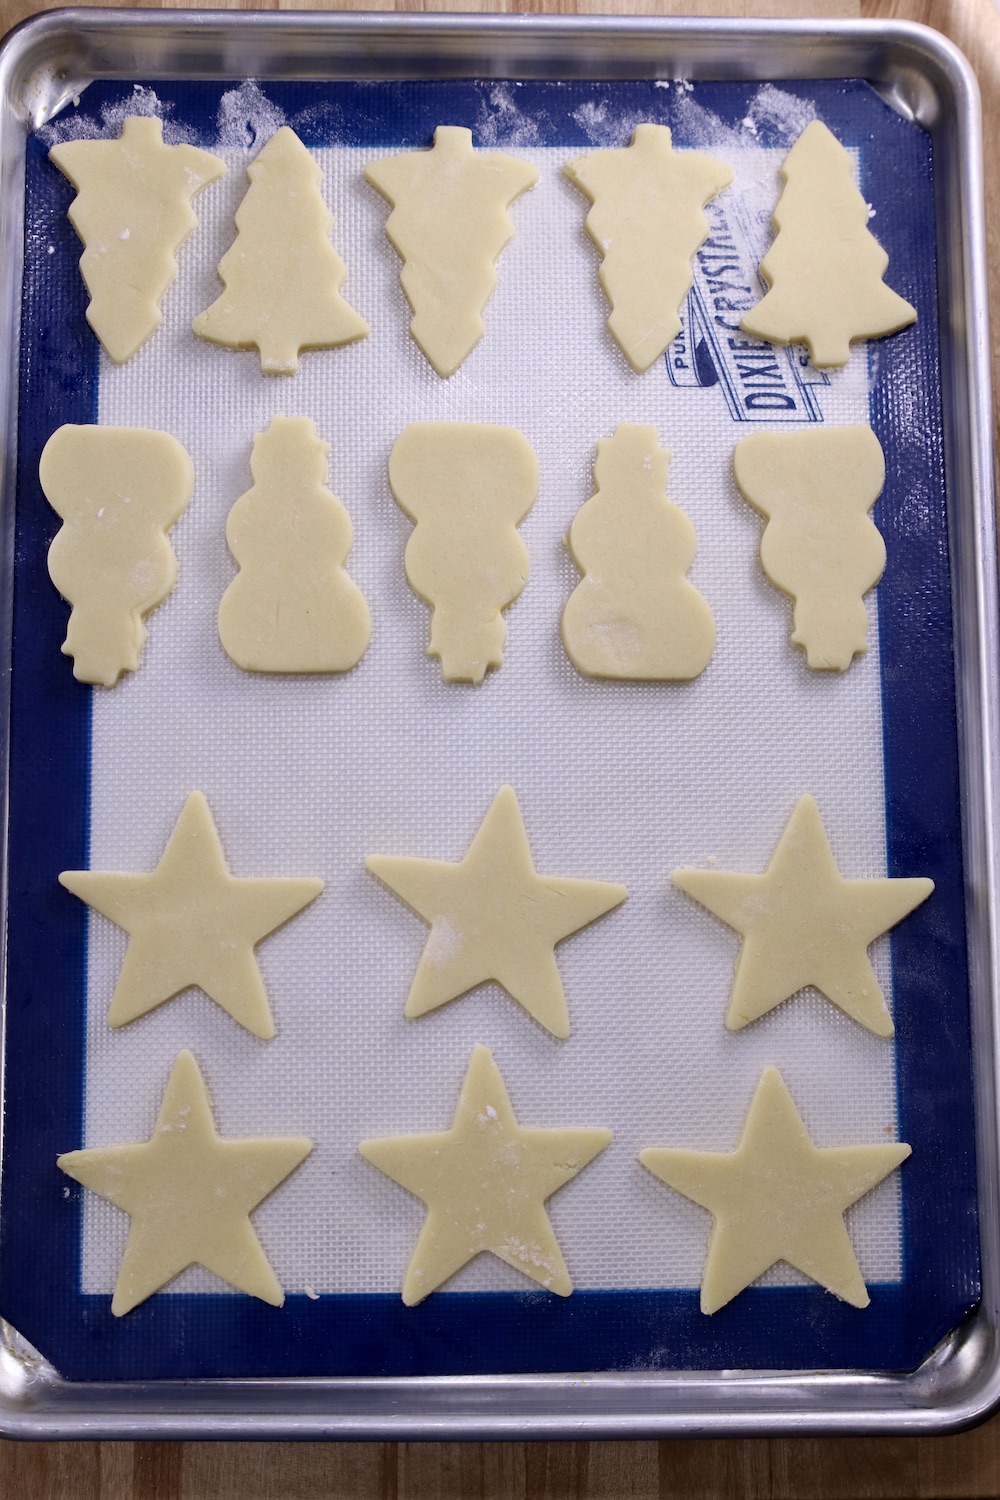 Cookie sheet lined with a silpat. Tree, snowmen and star cut out cookies ready to bake.